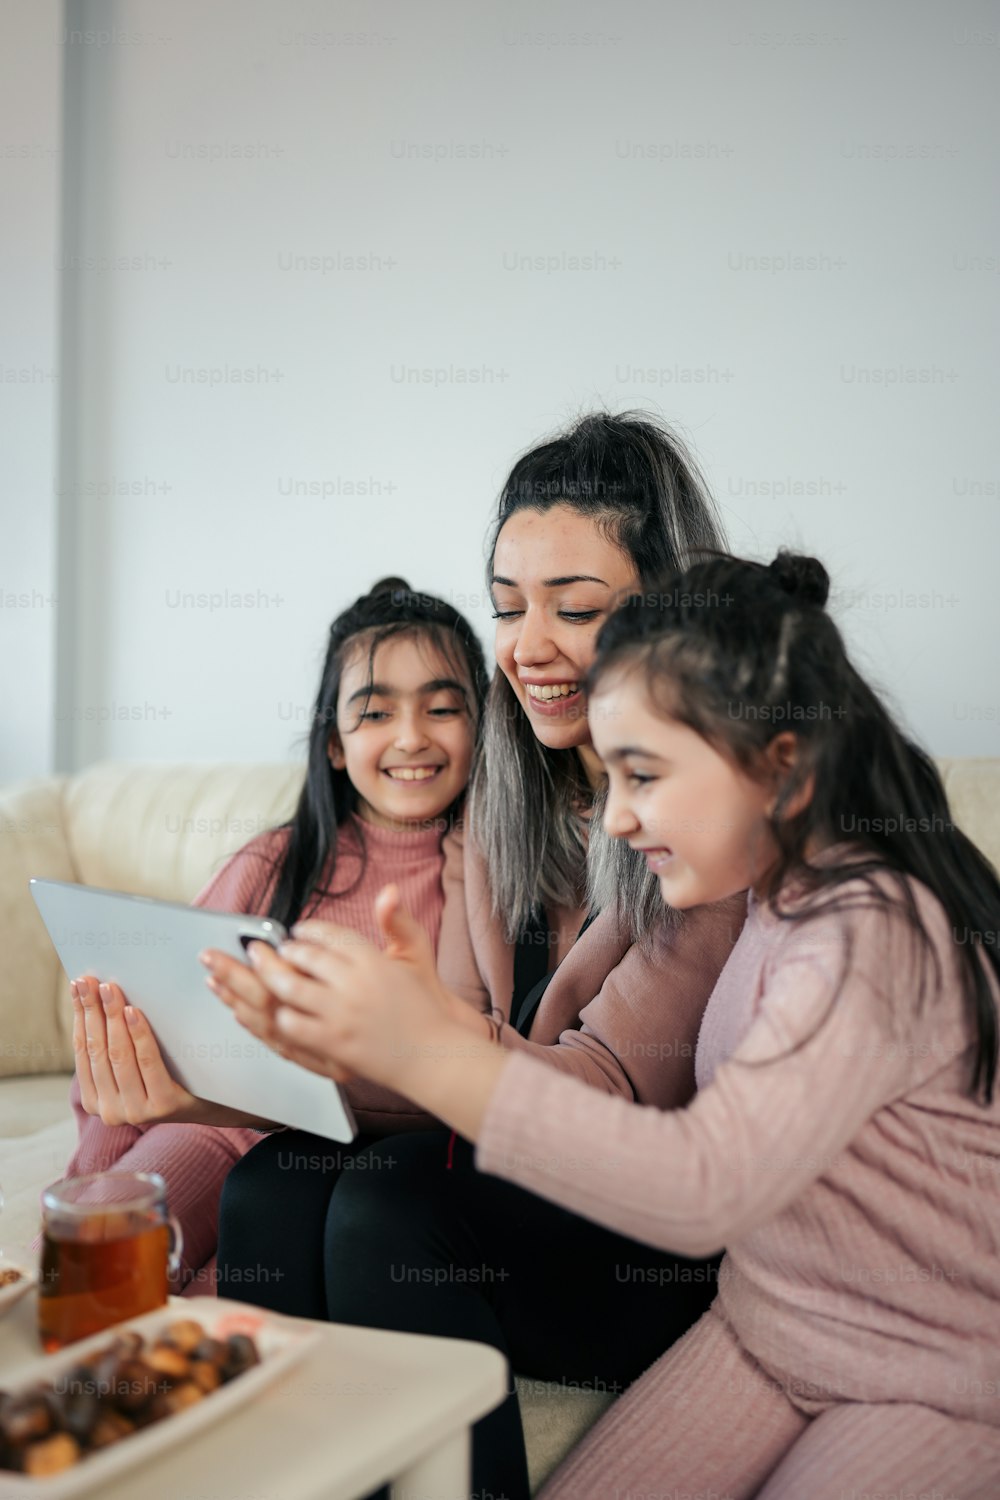 a woman and two girls sitting on a couch looking at a tablet